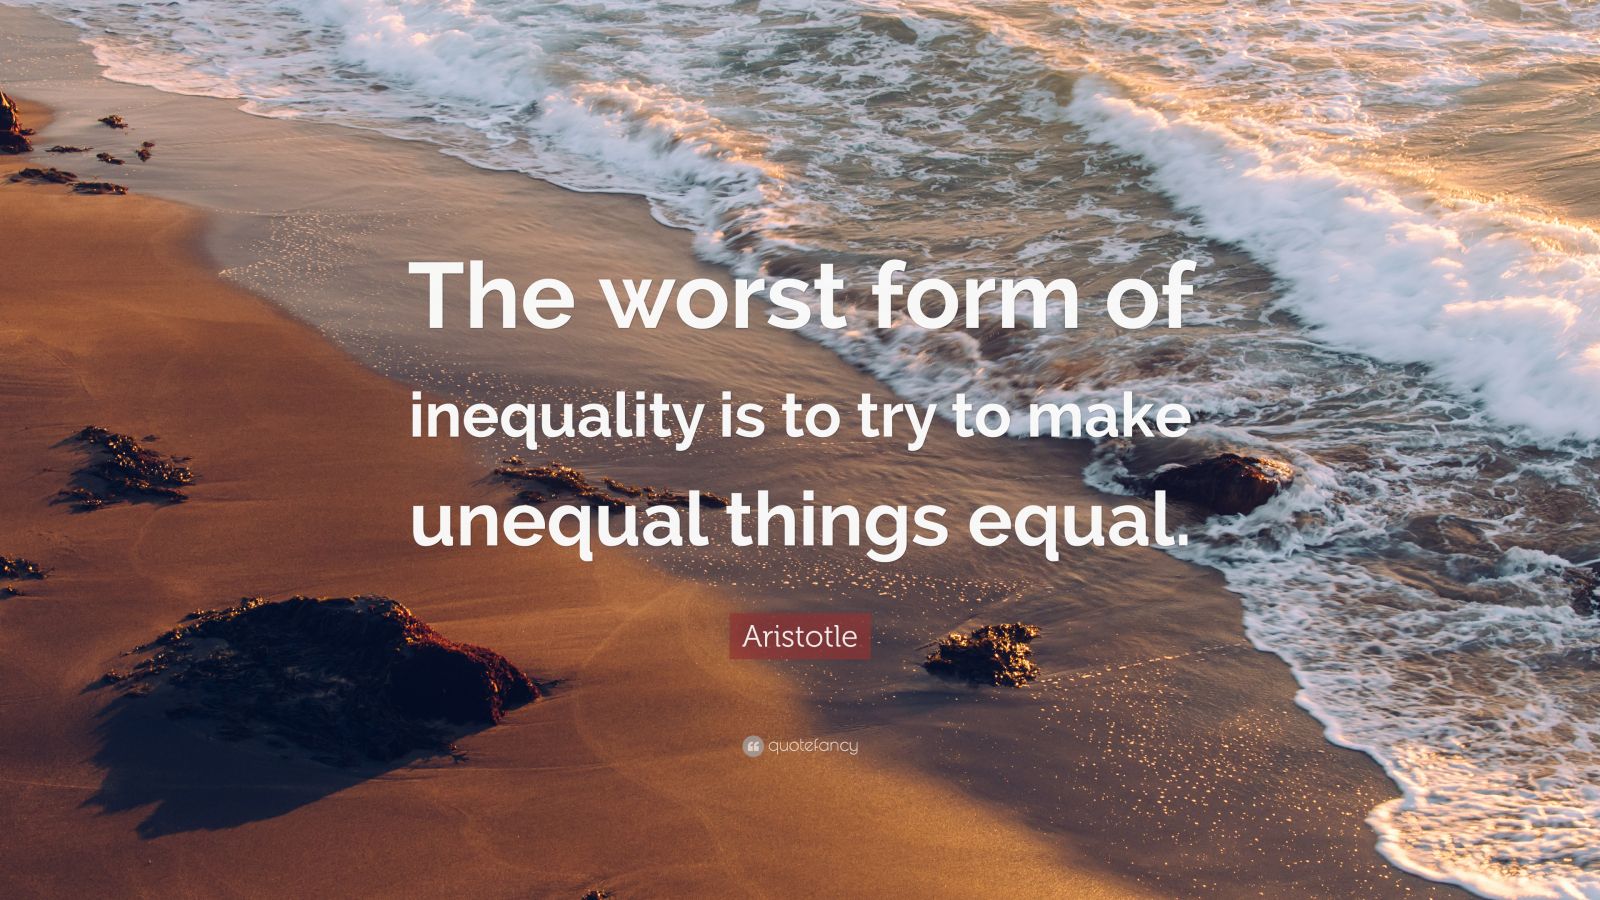 aristotle-quote-the-worst-form-of-inequality-is-to-try-to-make-unequal-things-equal-12